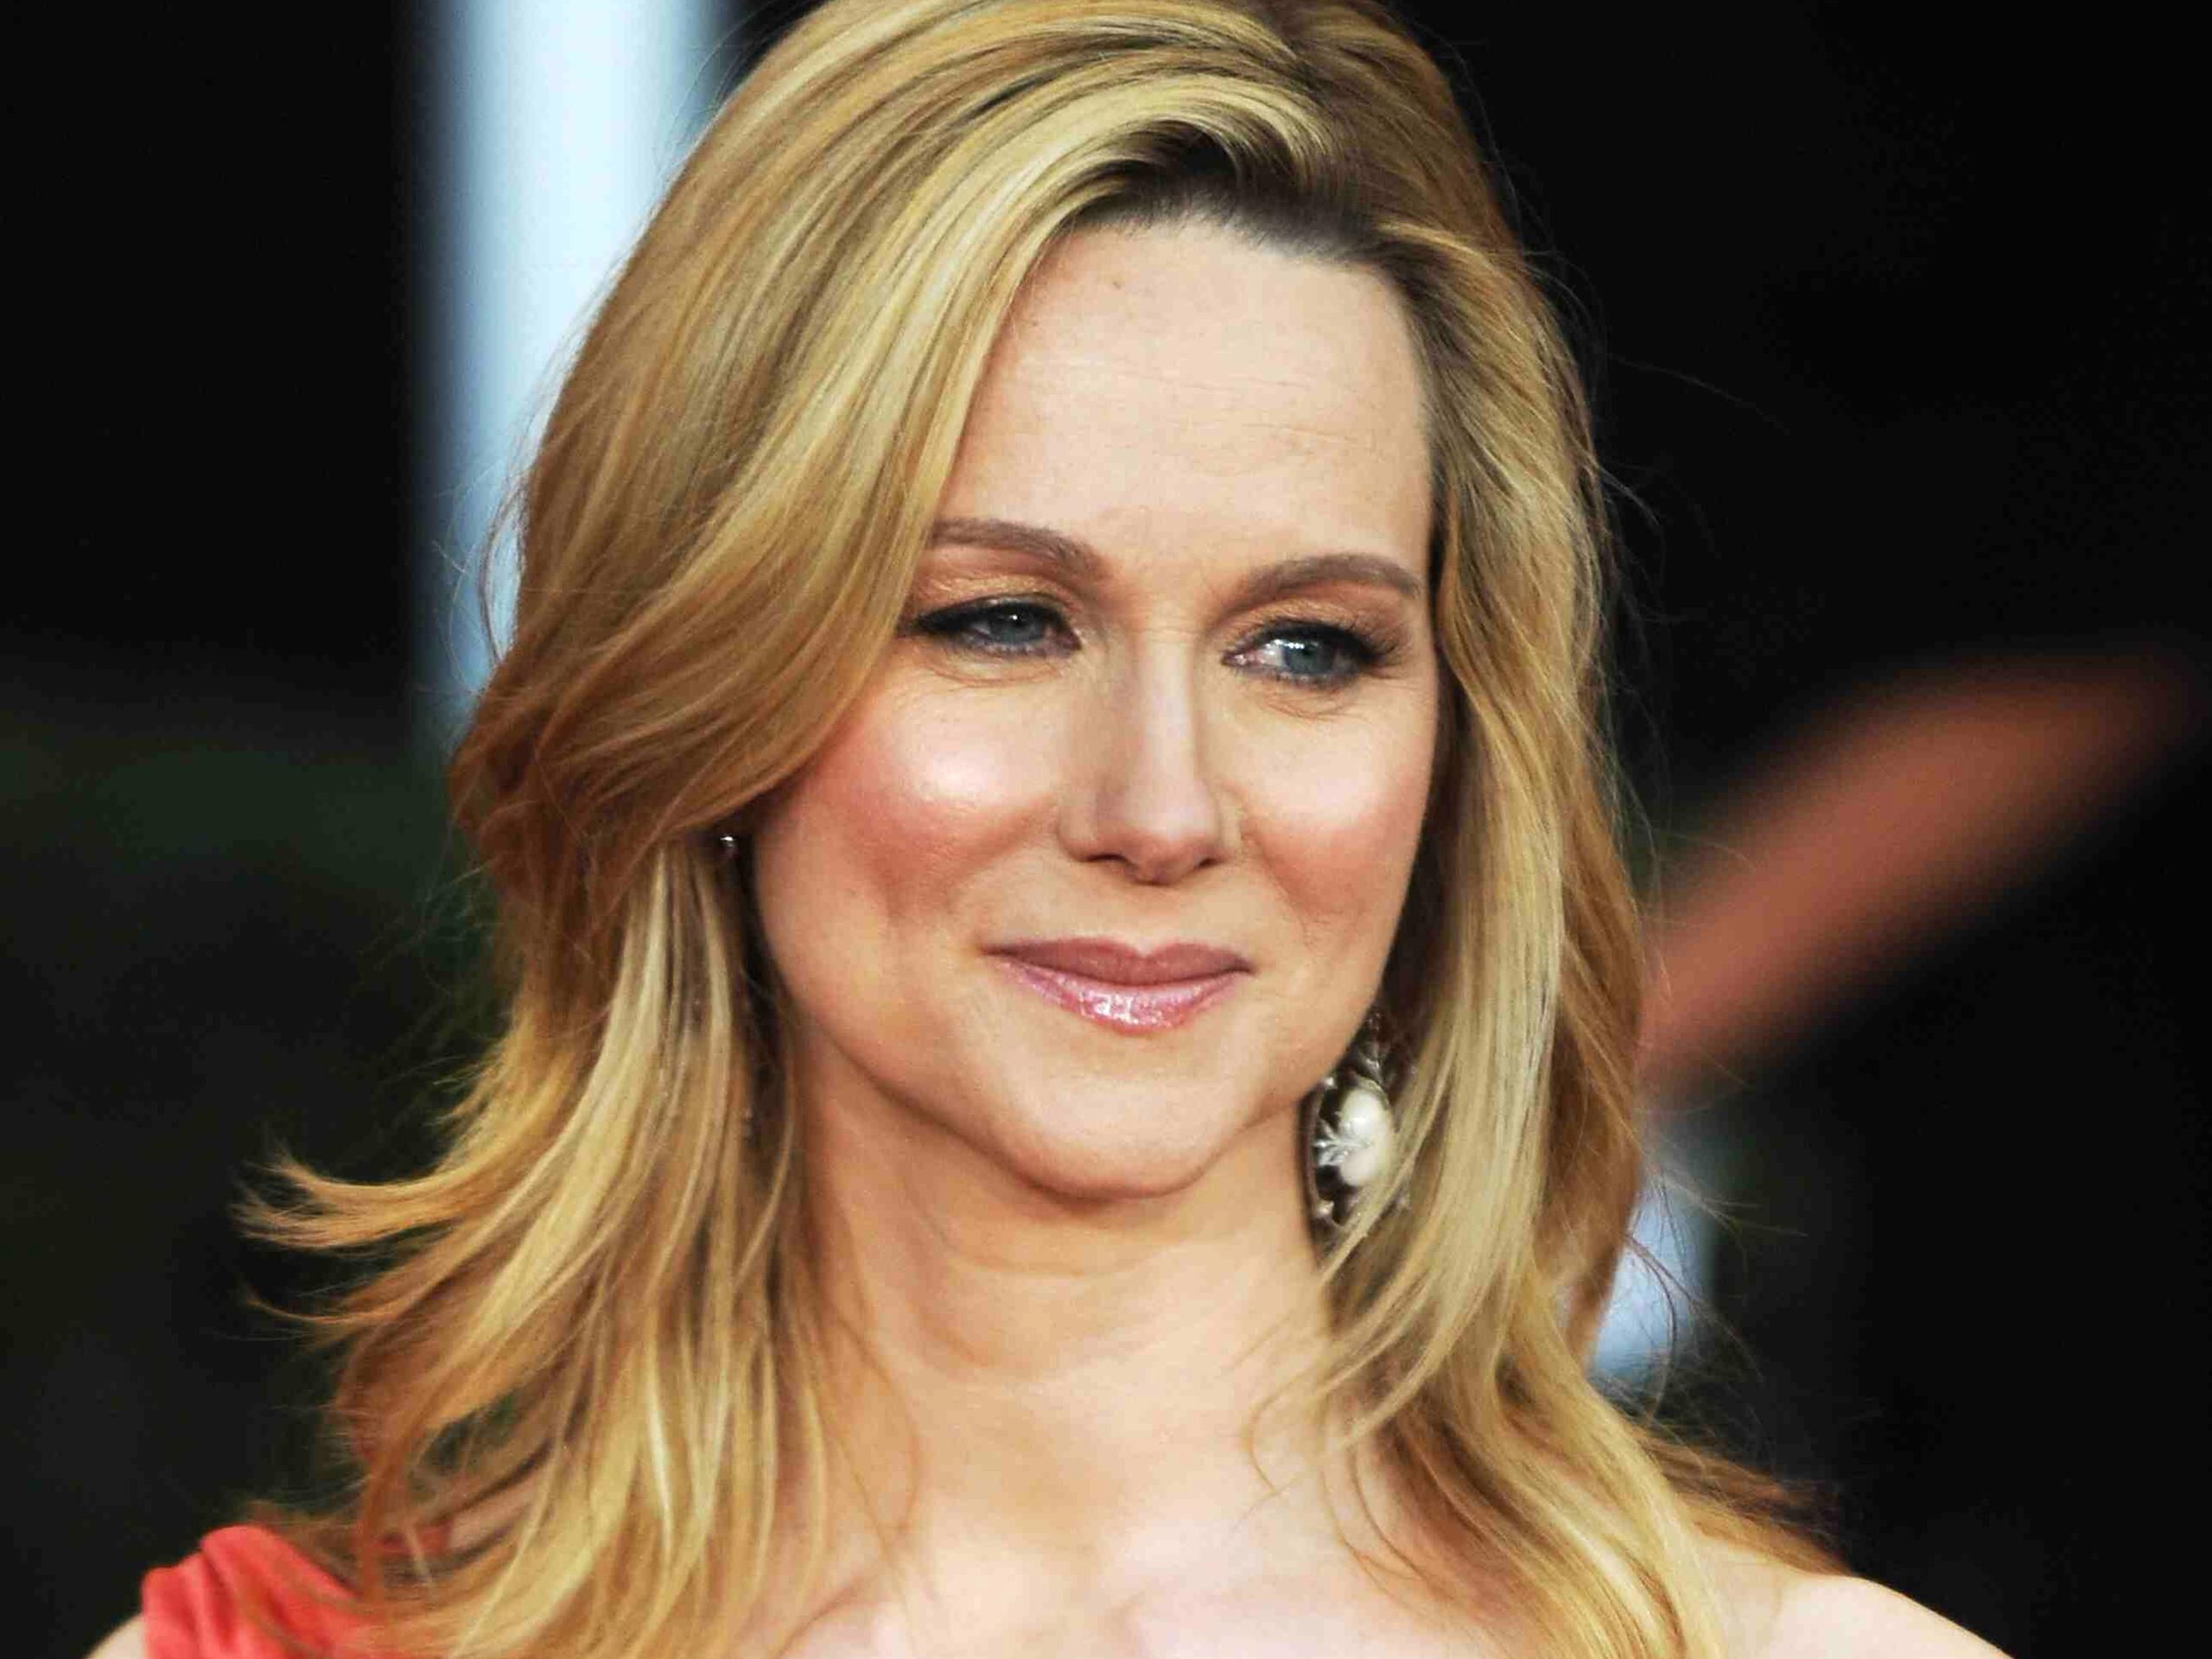 Laura Linney Height Feet Inches cm Weight Body Measurements